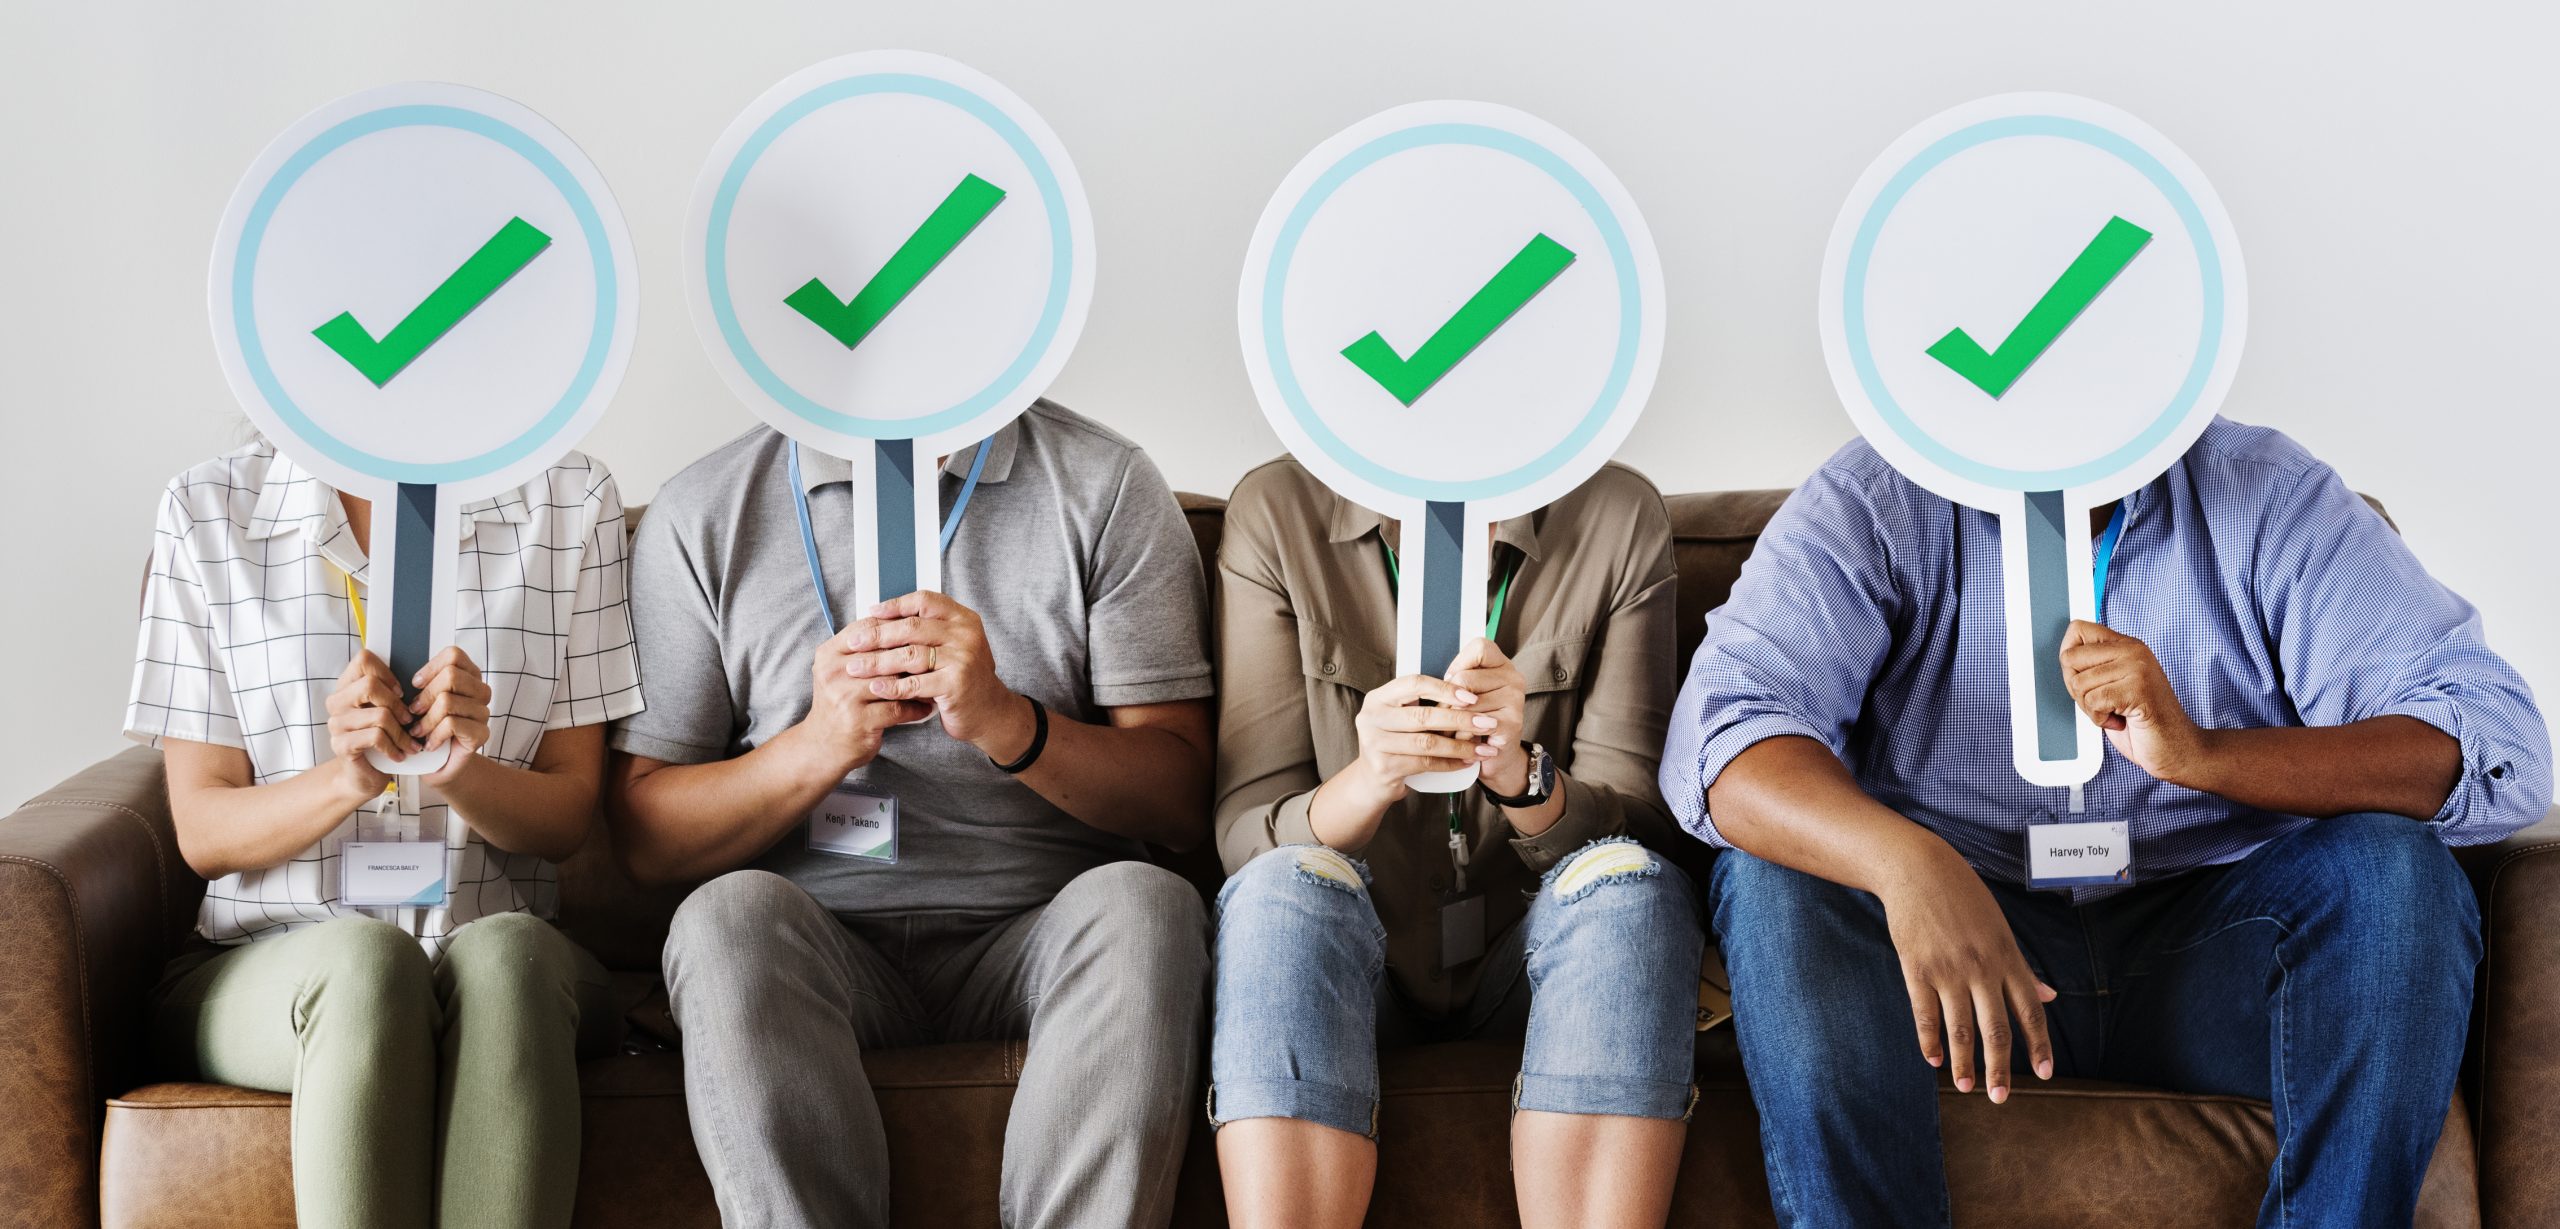 Group of people holding check icons